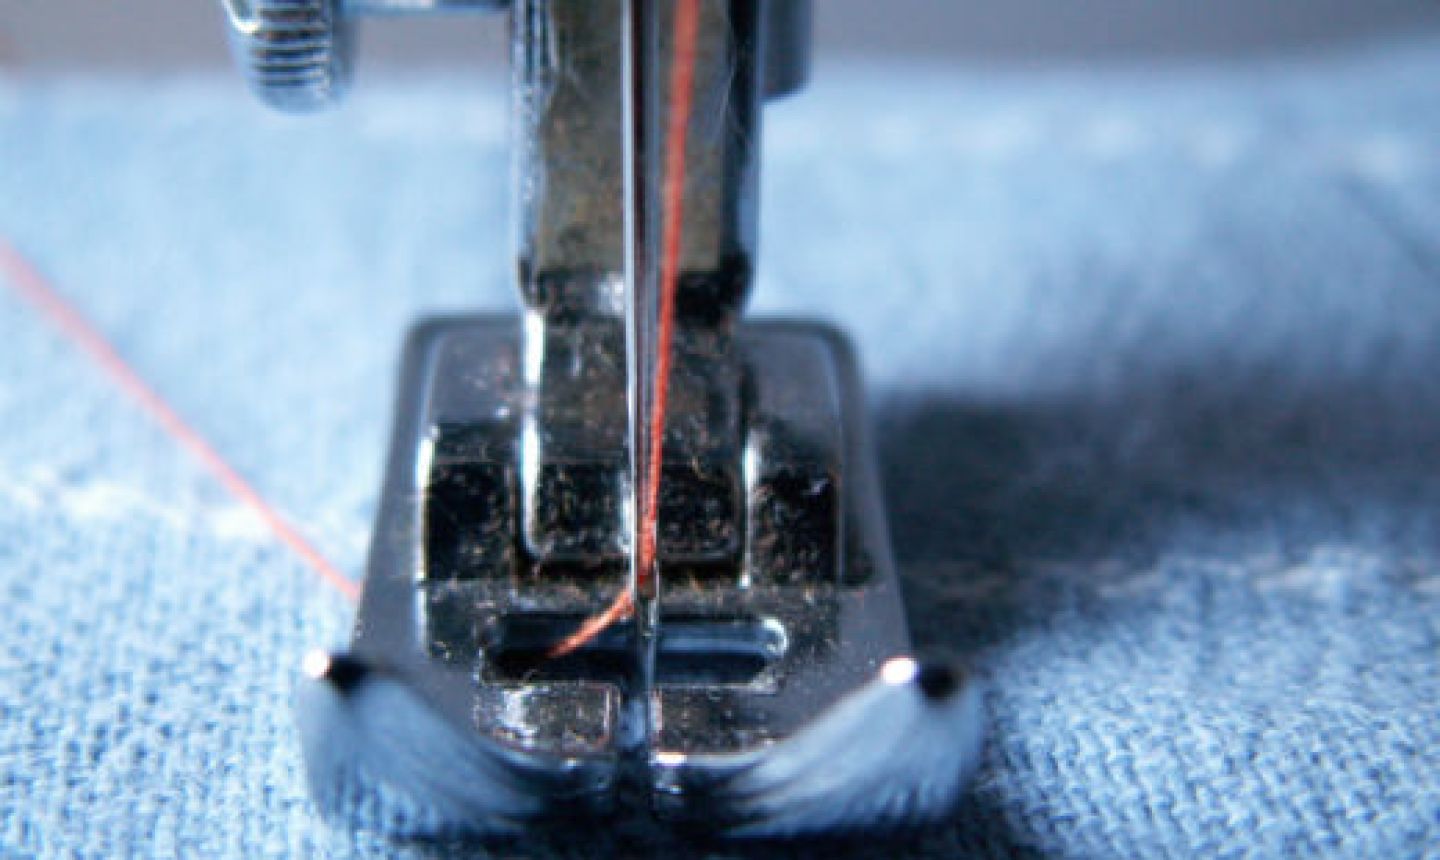 Types of sewing machine needles for stitching leather according to